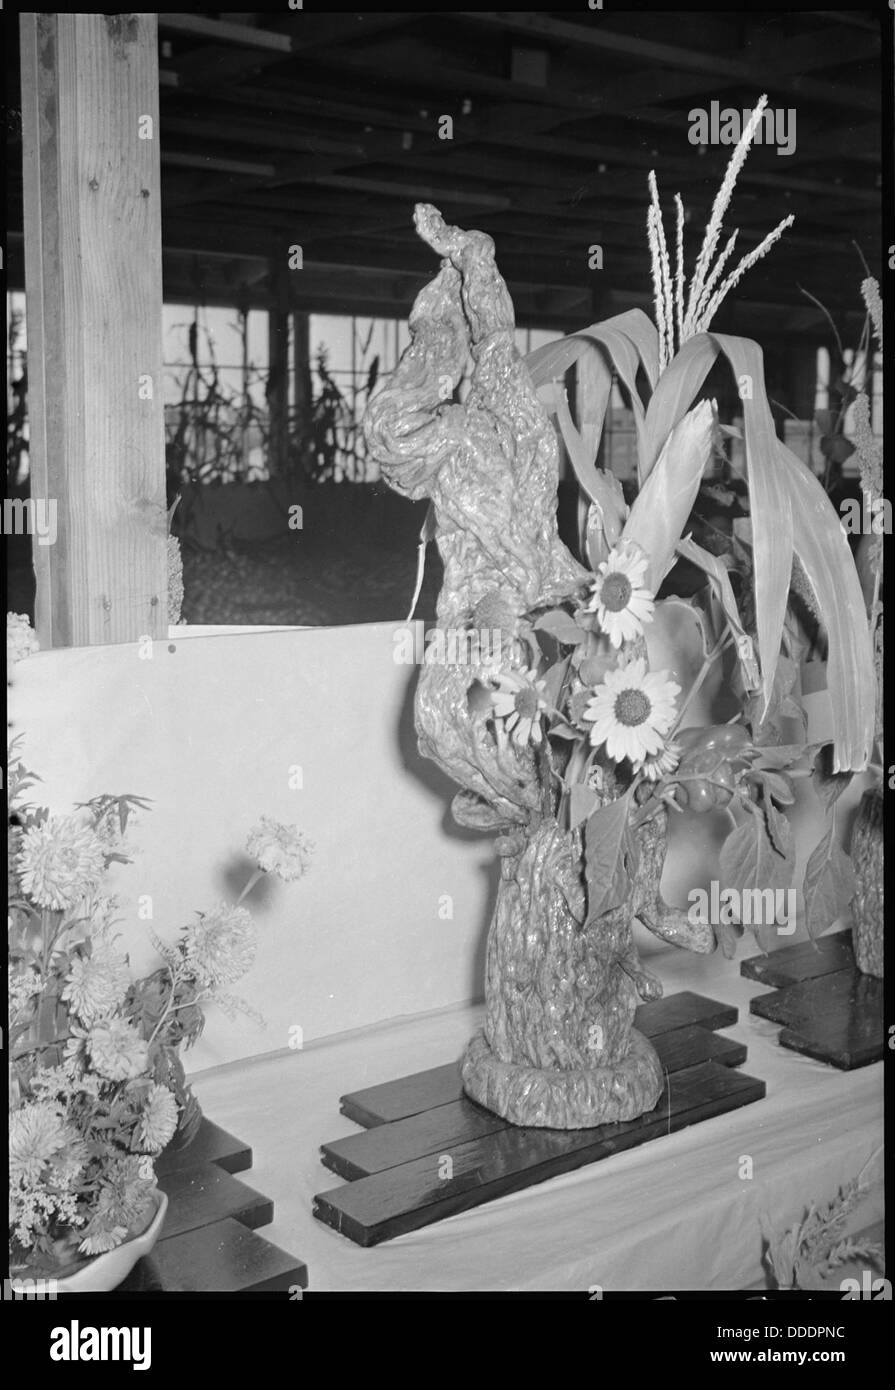 Granada Relocation Center, Amache, Colorado. Display of flower and vegetable arrangement at the Ama . . . 537319 Stock Photo